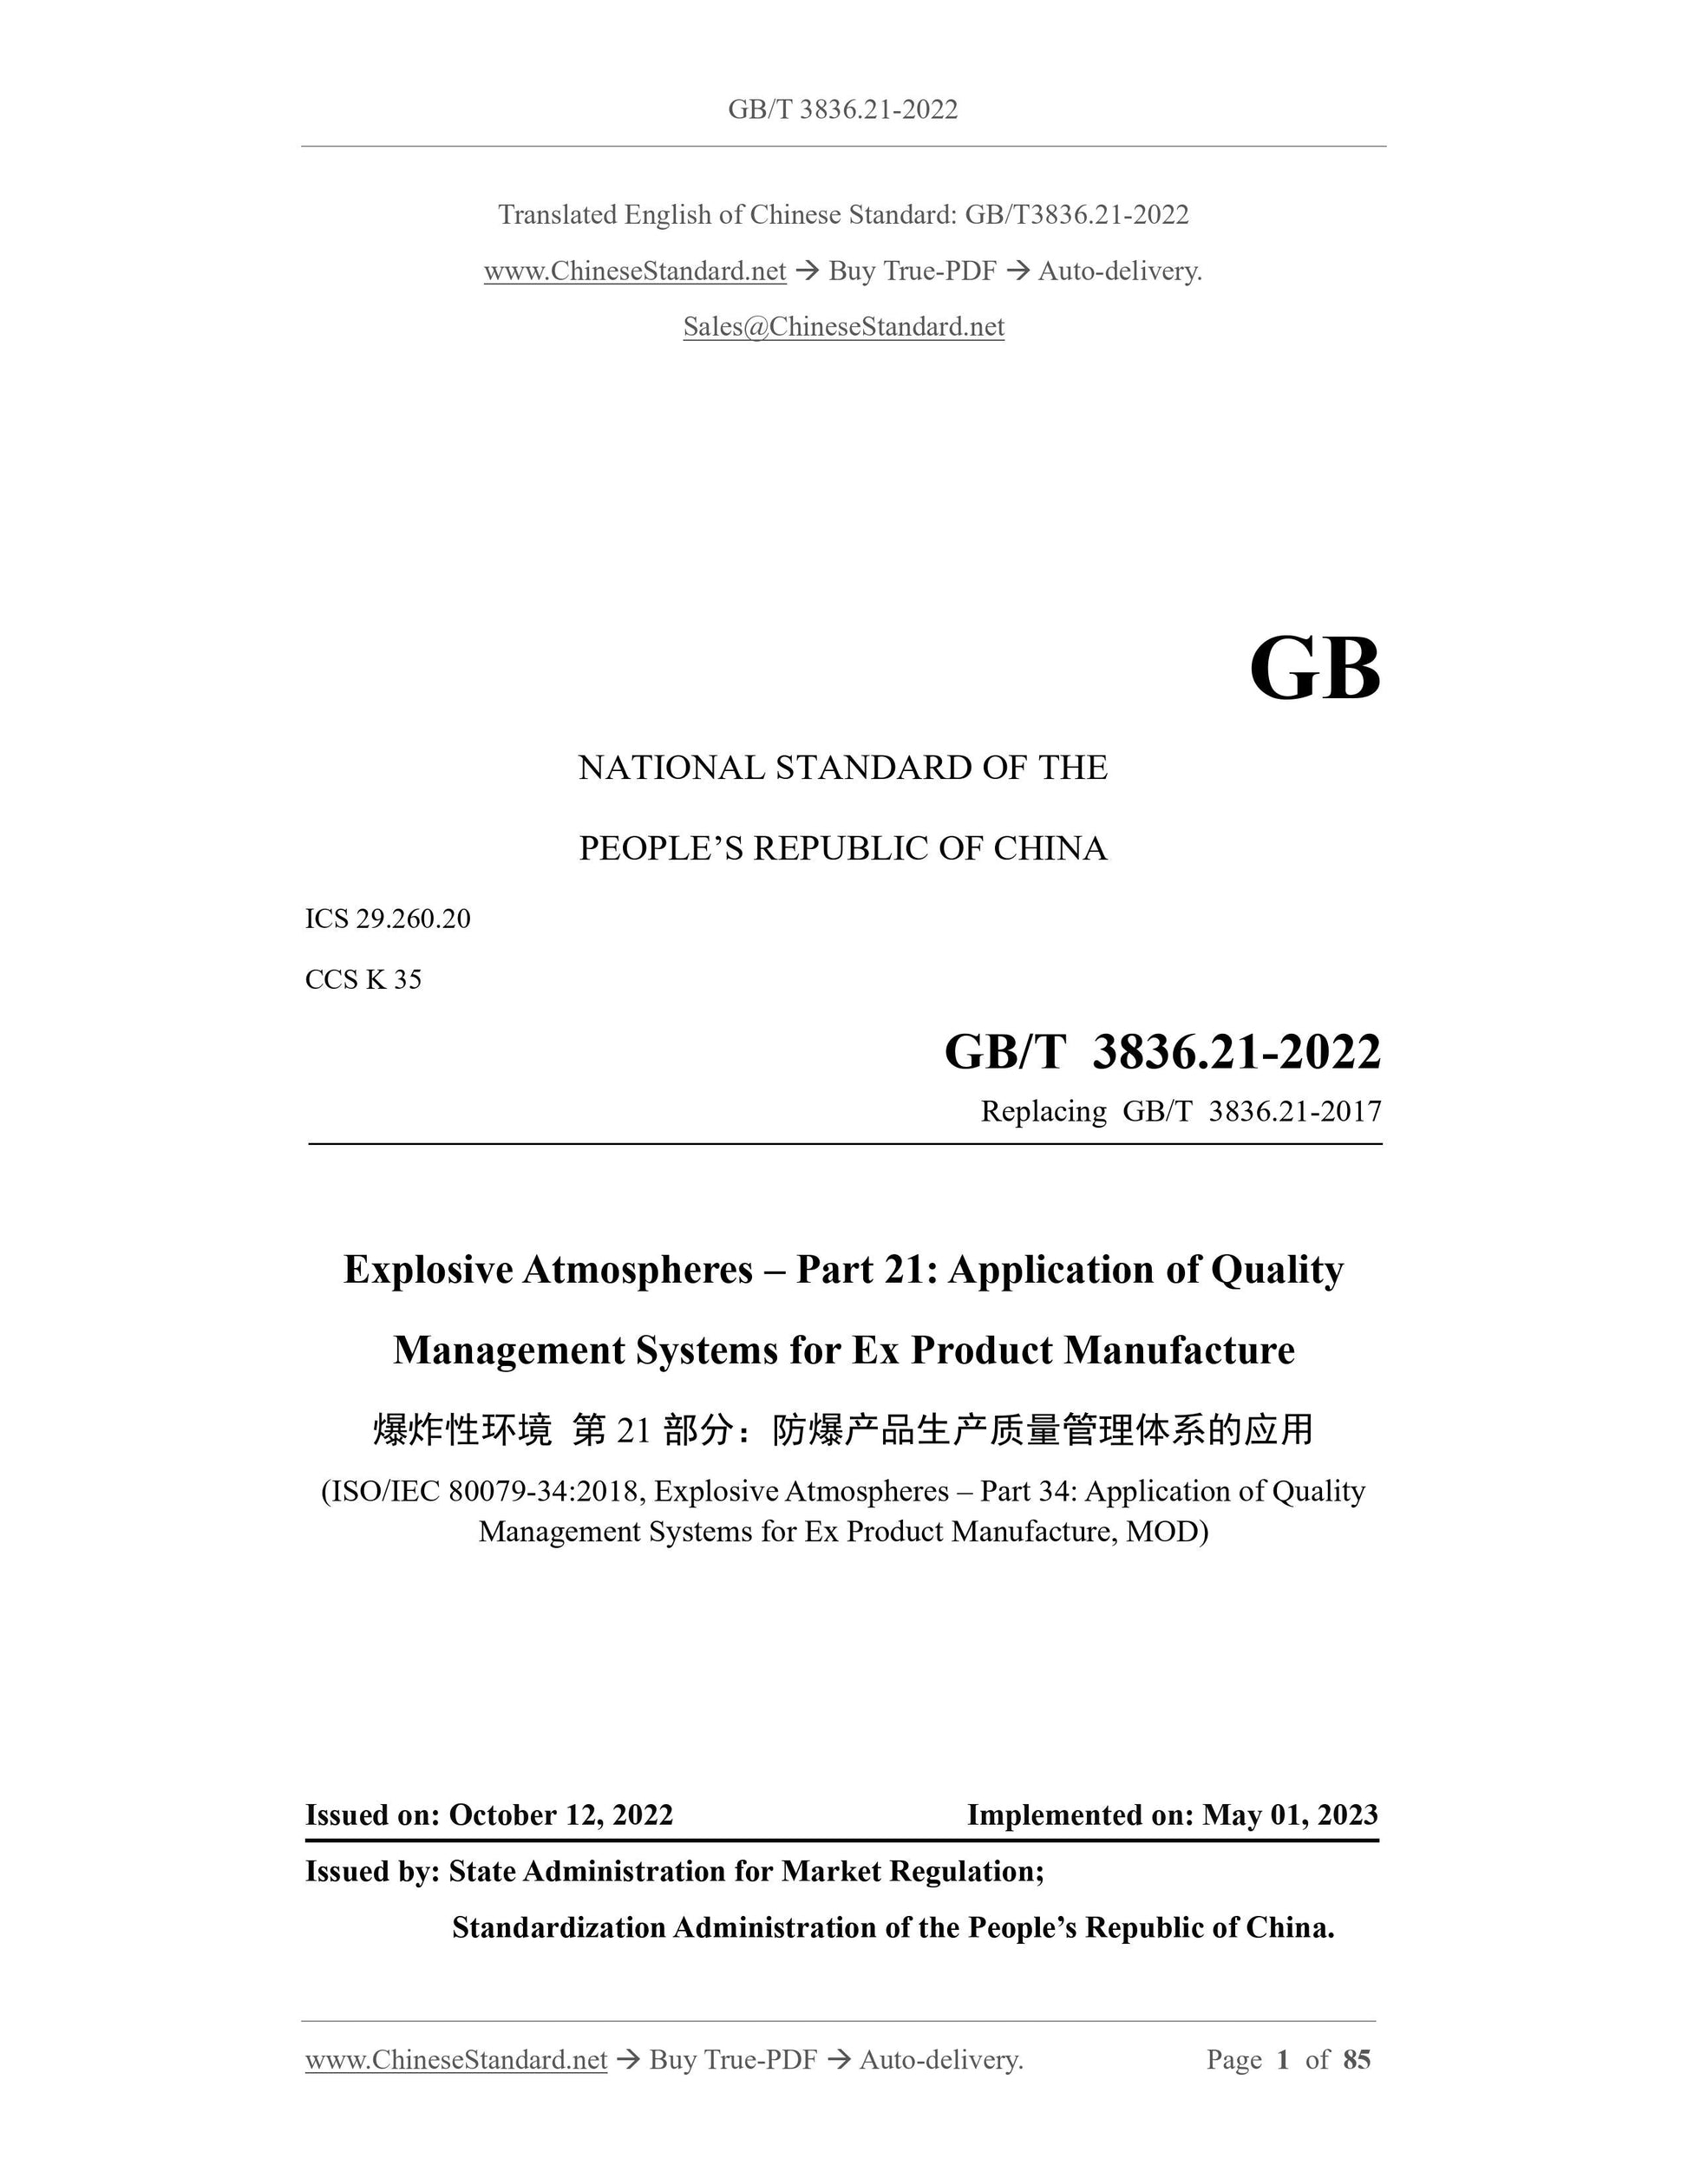 GB/T 3836.21-2022 Page 1